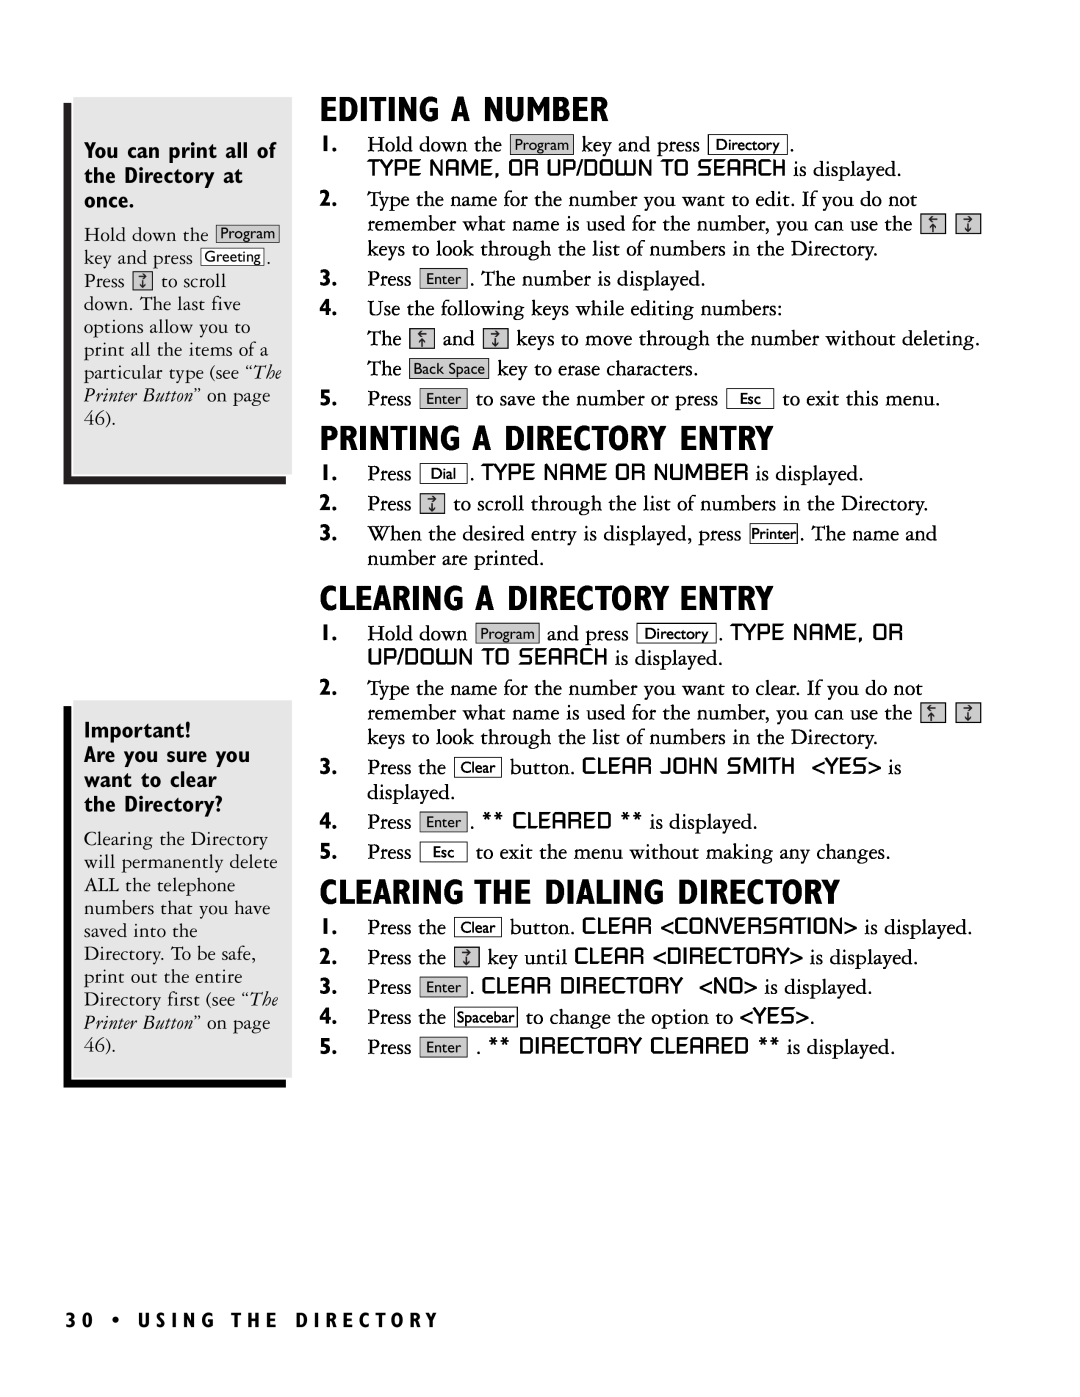 Ultratec PRO80TM Editing A Number, Printing A Directory Entry, Clearing A Directory Entry, Clearing The Dialing Directory 